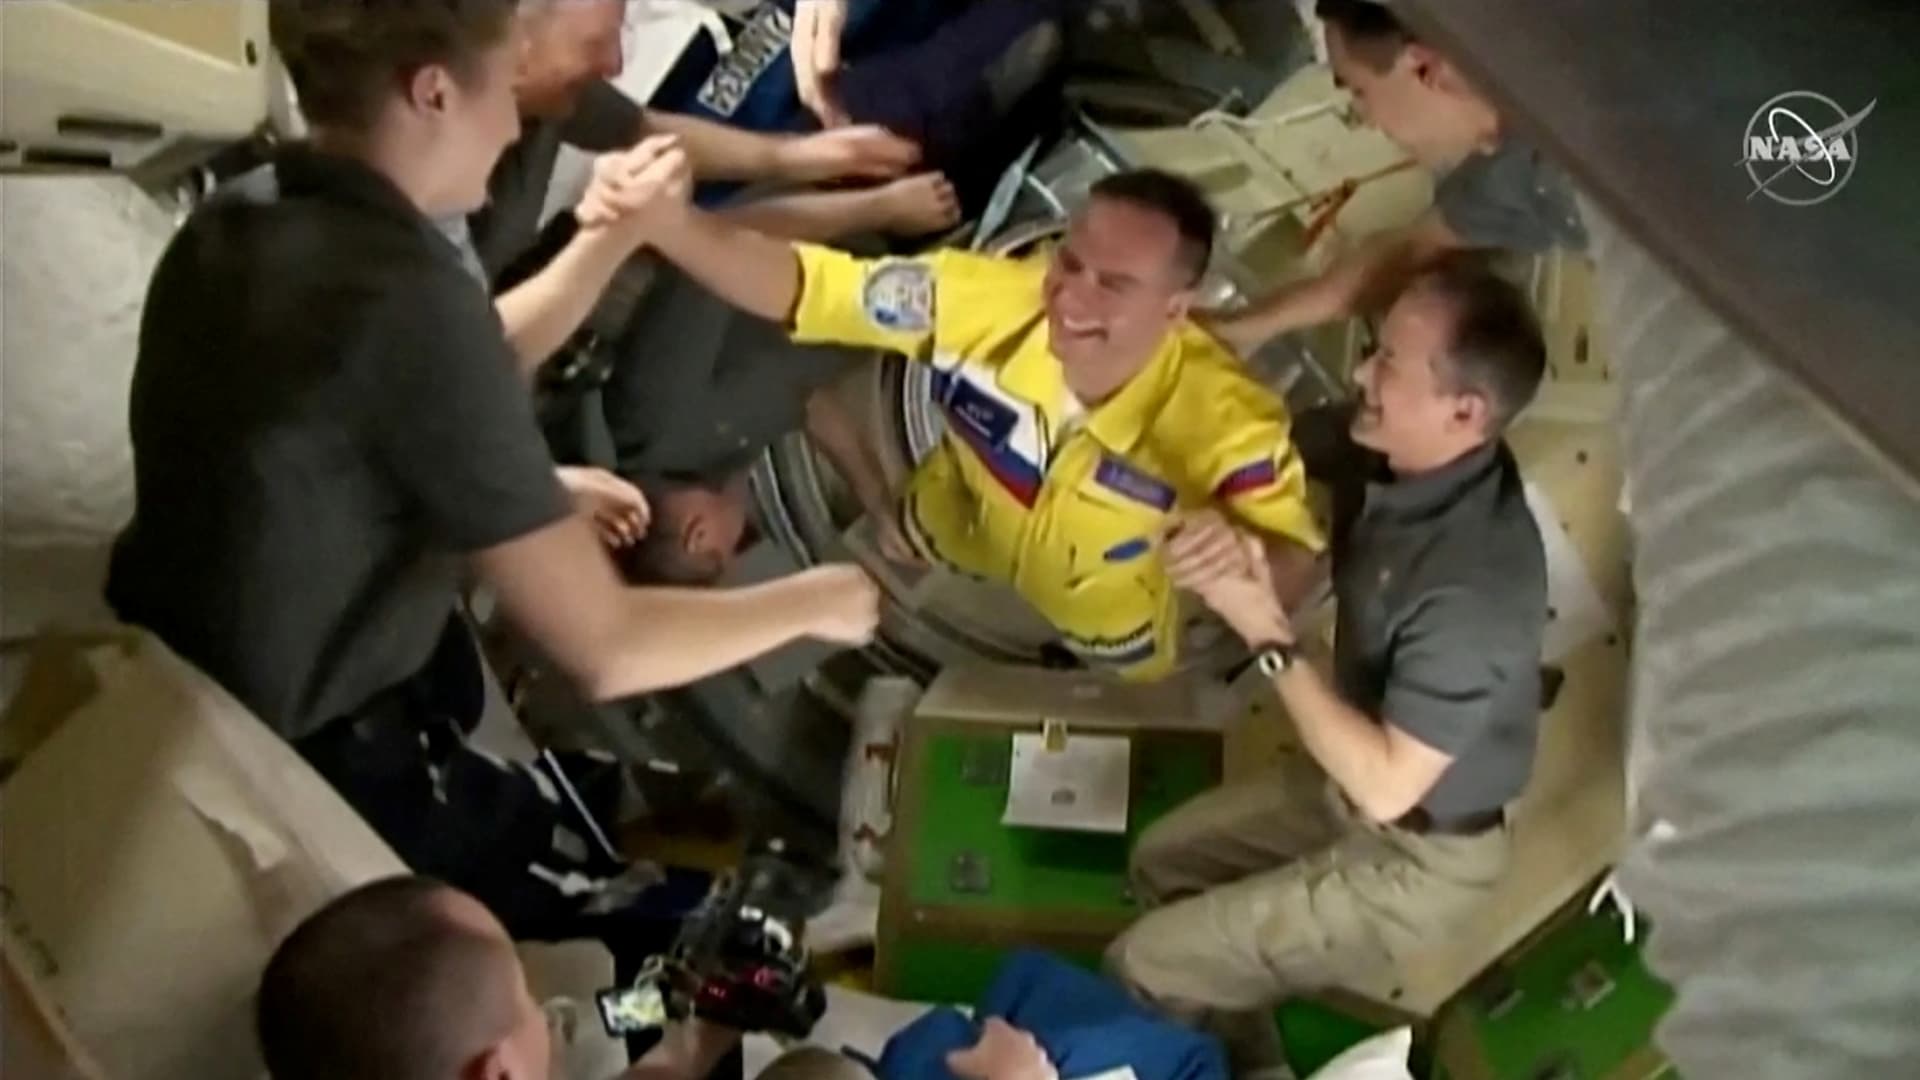 Russian cosmonauts arrive wearing yellow and blue flight suits at the International Space Station after docking their Soyuz capsule March 18, 2022 i a still image from video. Video taken March 18, 2022.